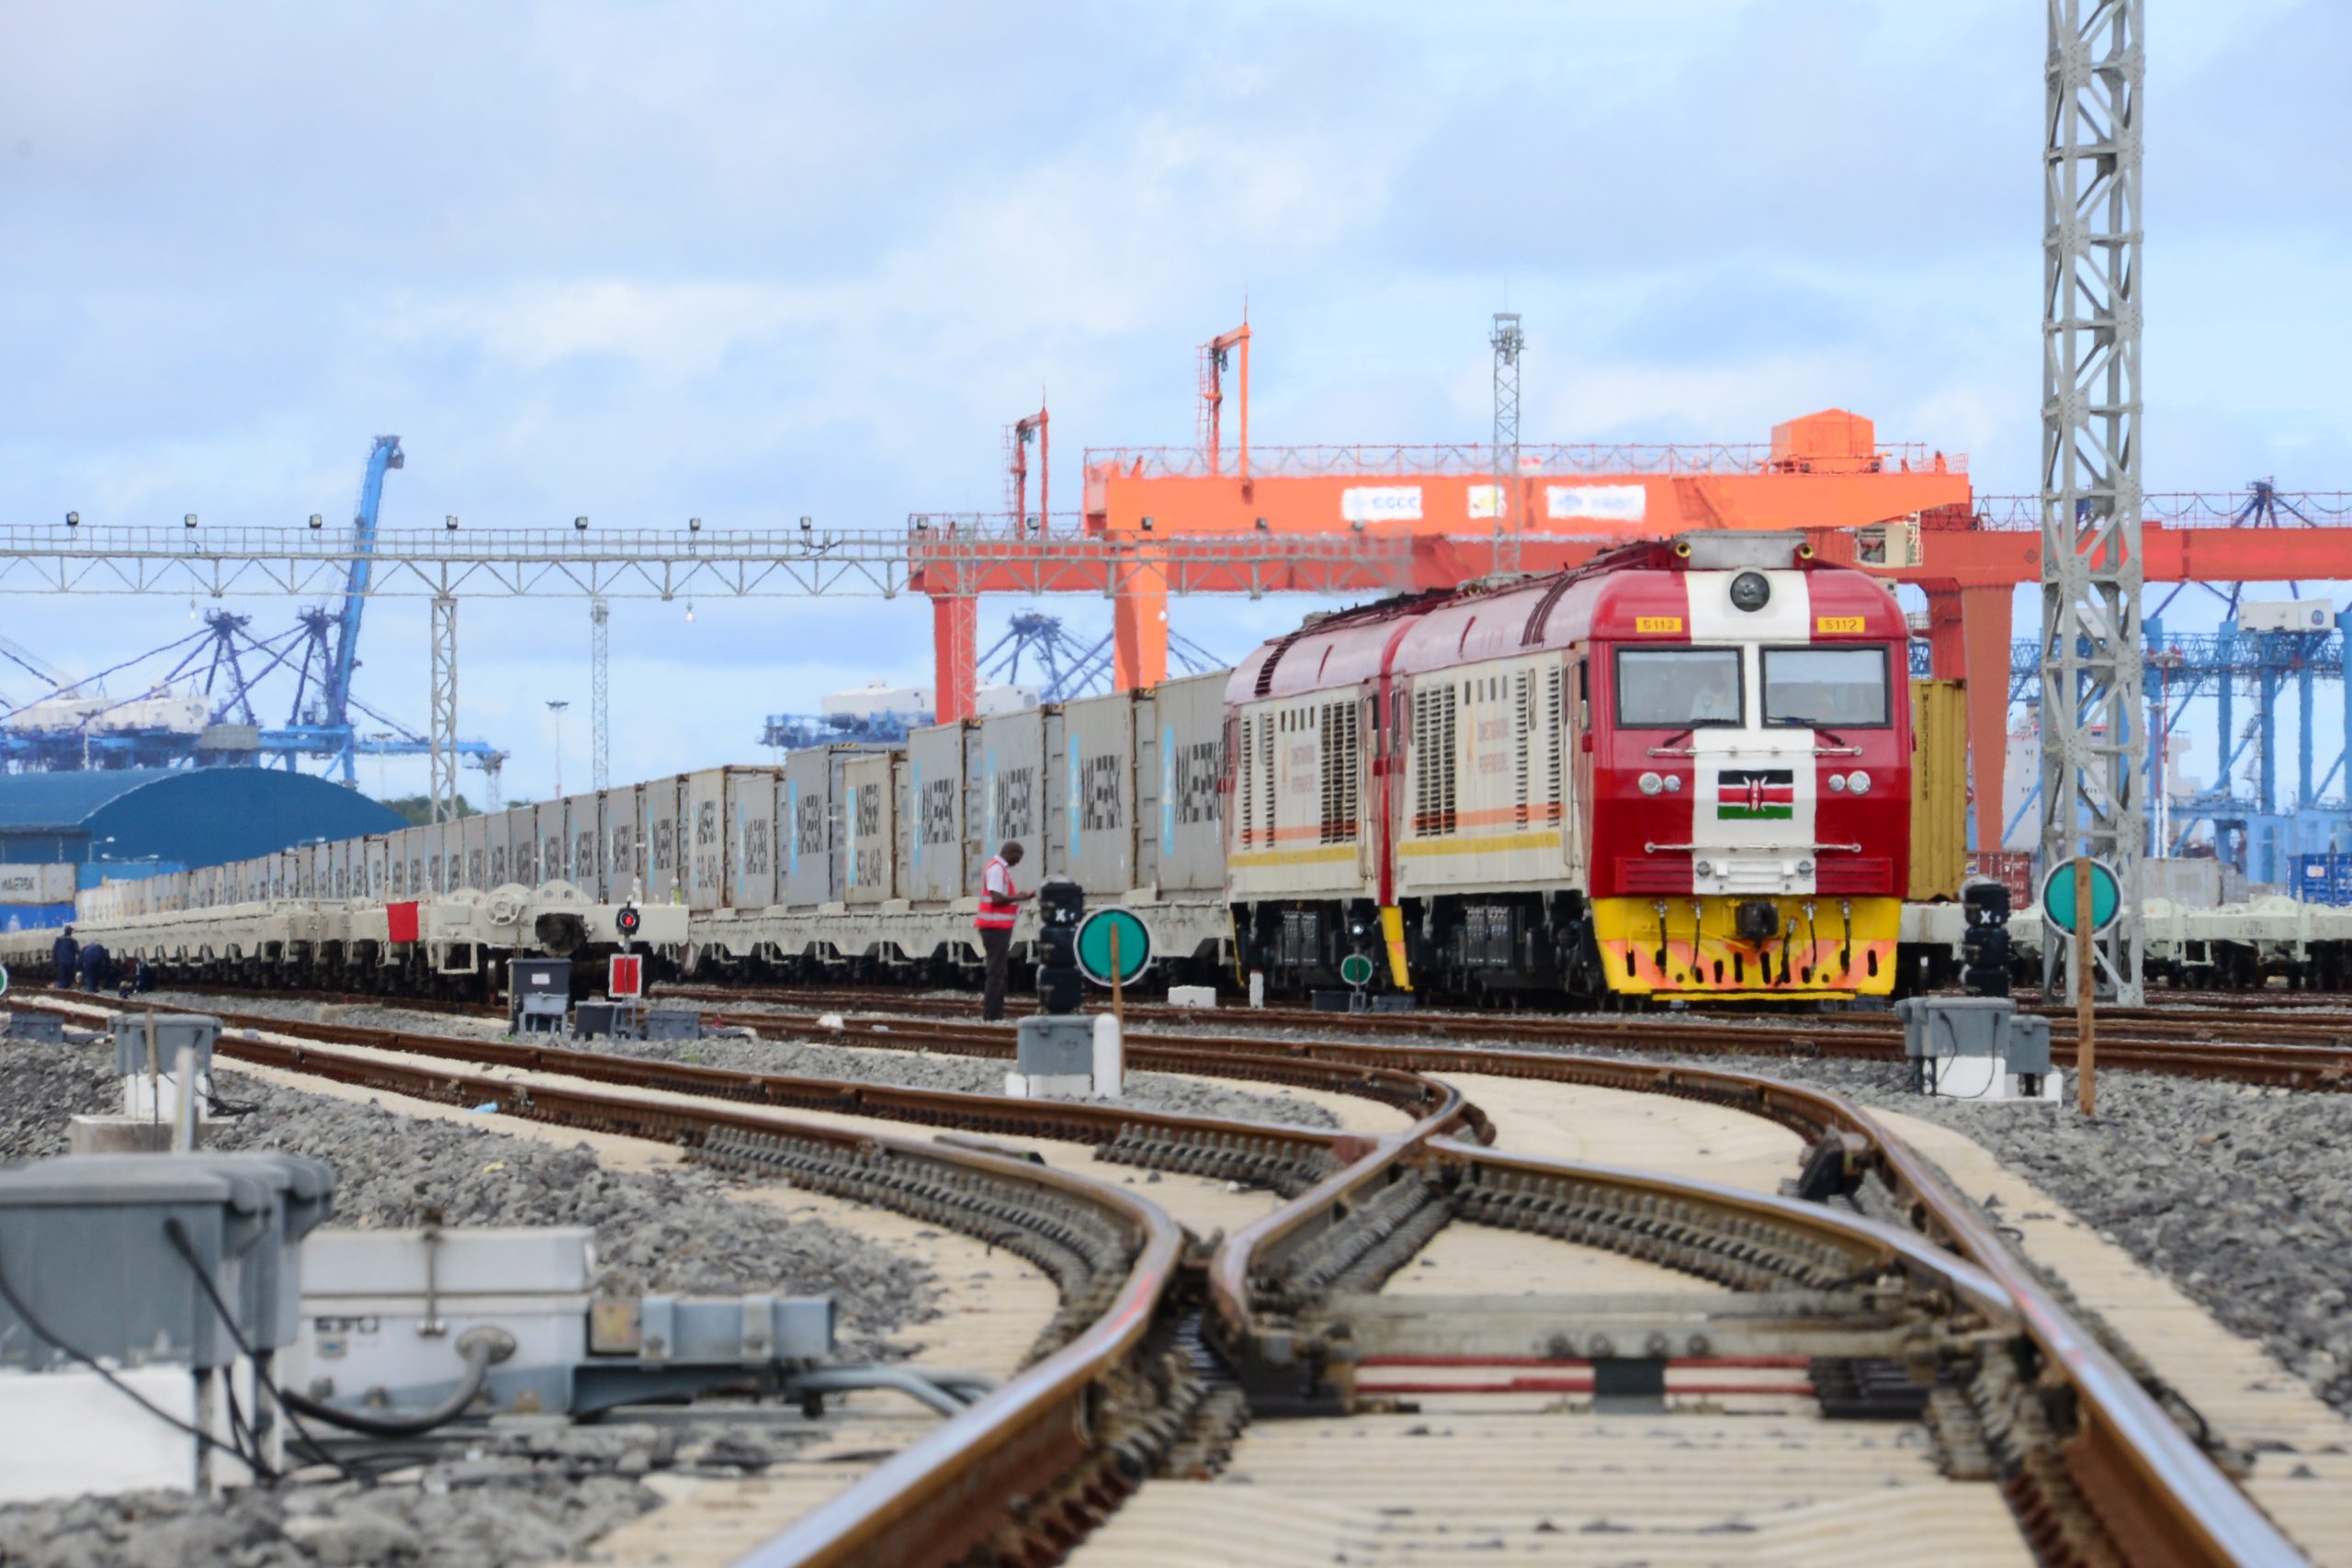 Goldfields Logistics Ltd SGR cargo train loaded with Maersk containers destined to Nairobi ICD